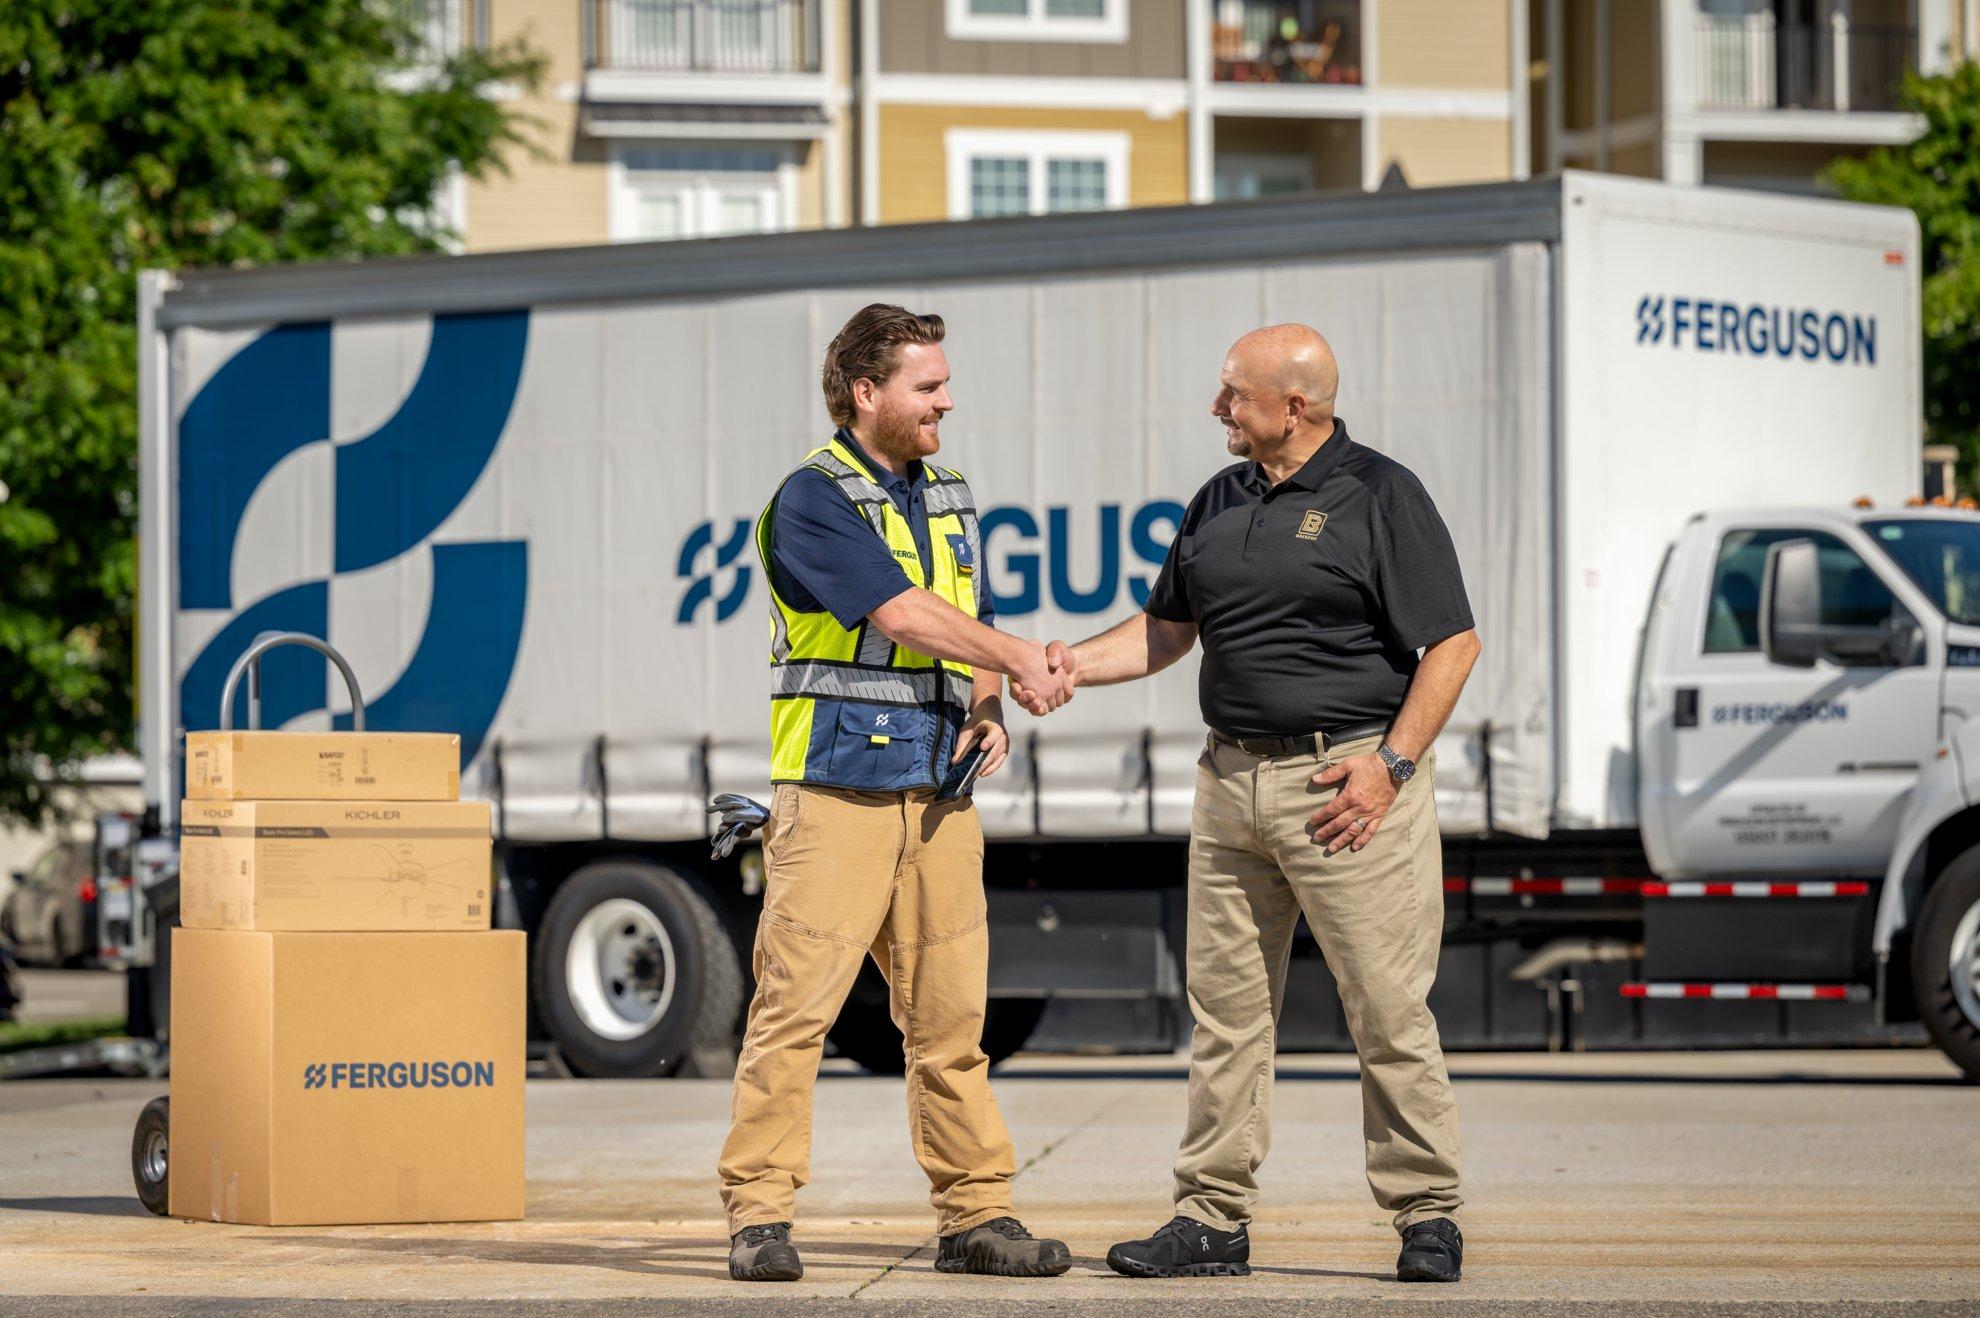 In front of a Ferguson delivery truck, an associate shakes hands with a customer.